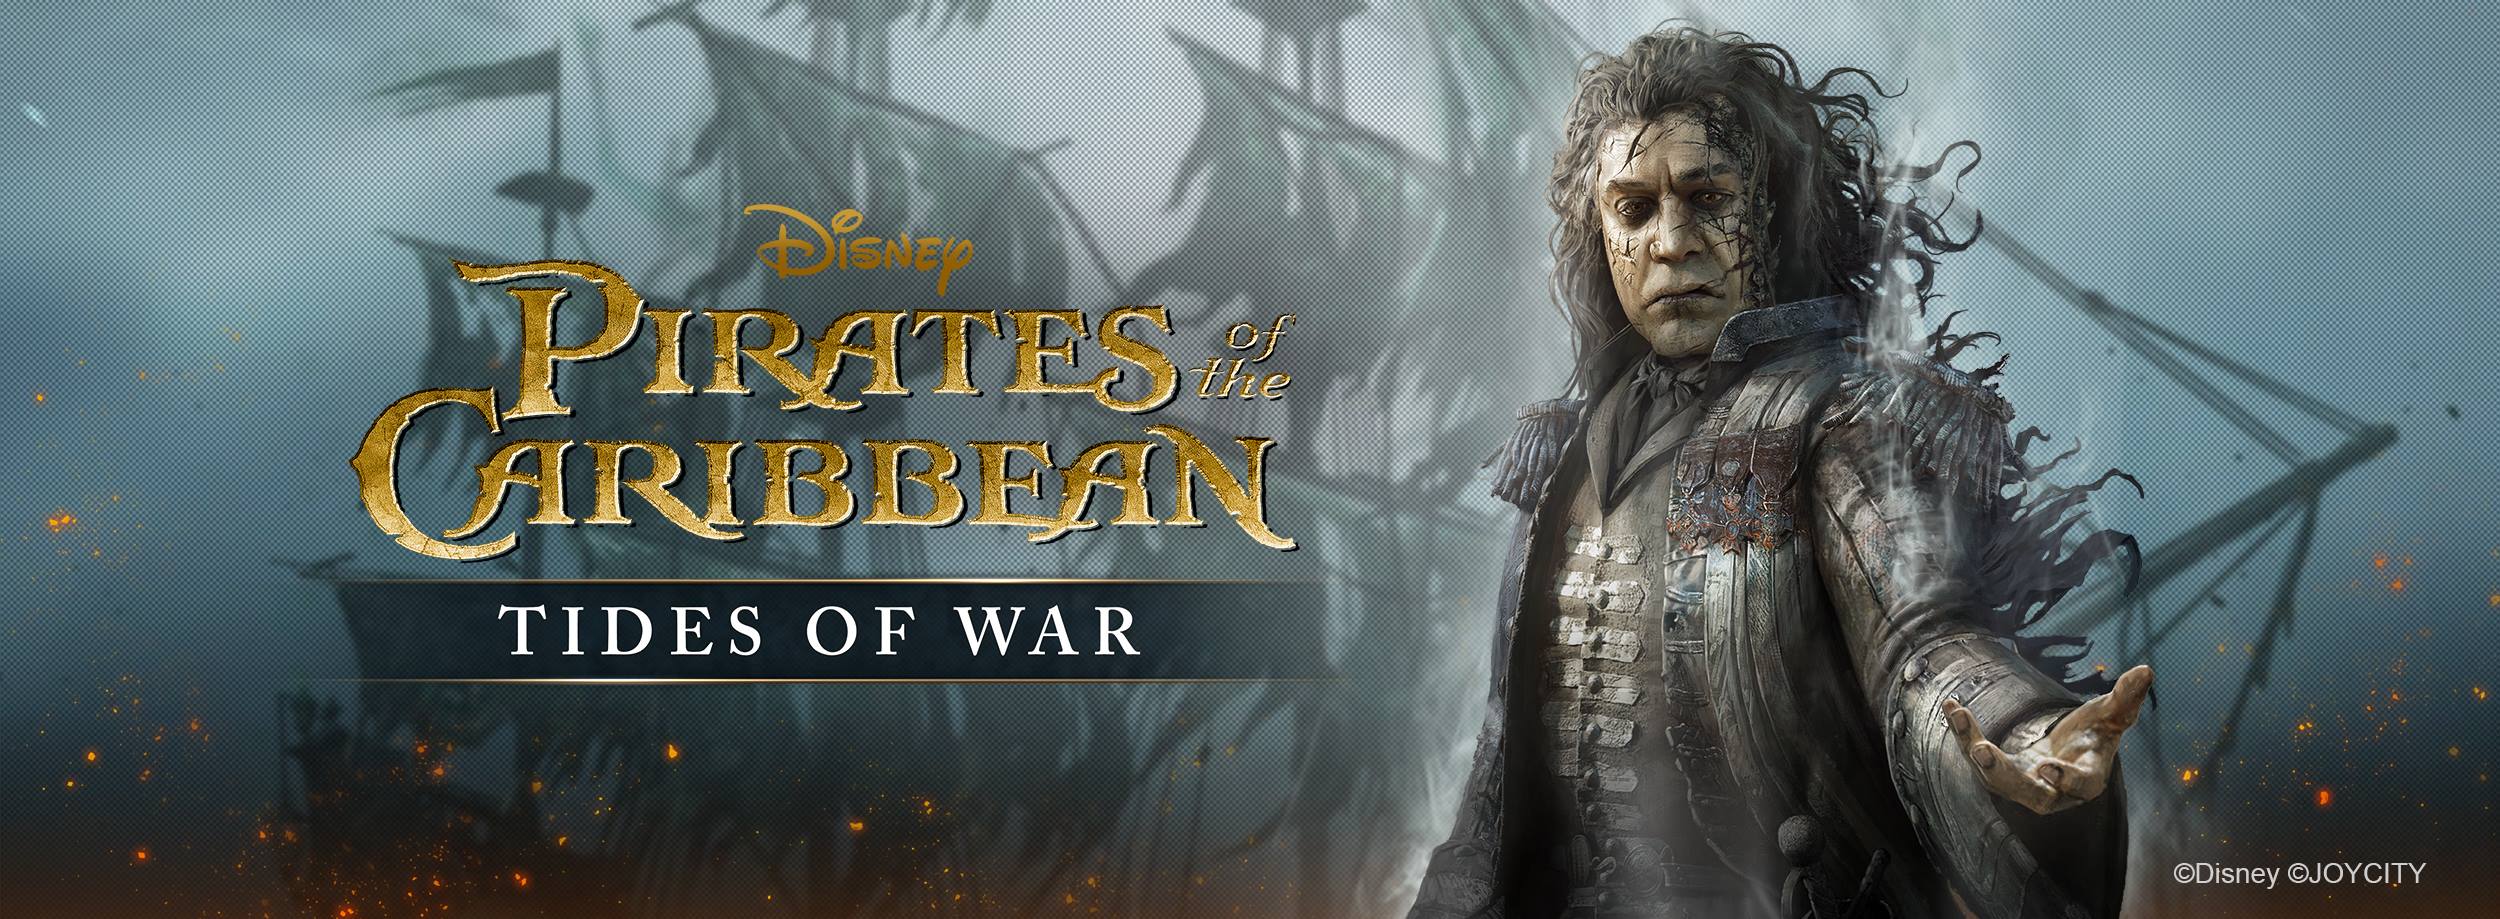 “Pirates of the Carribbean: Tides of War” Update